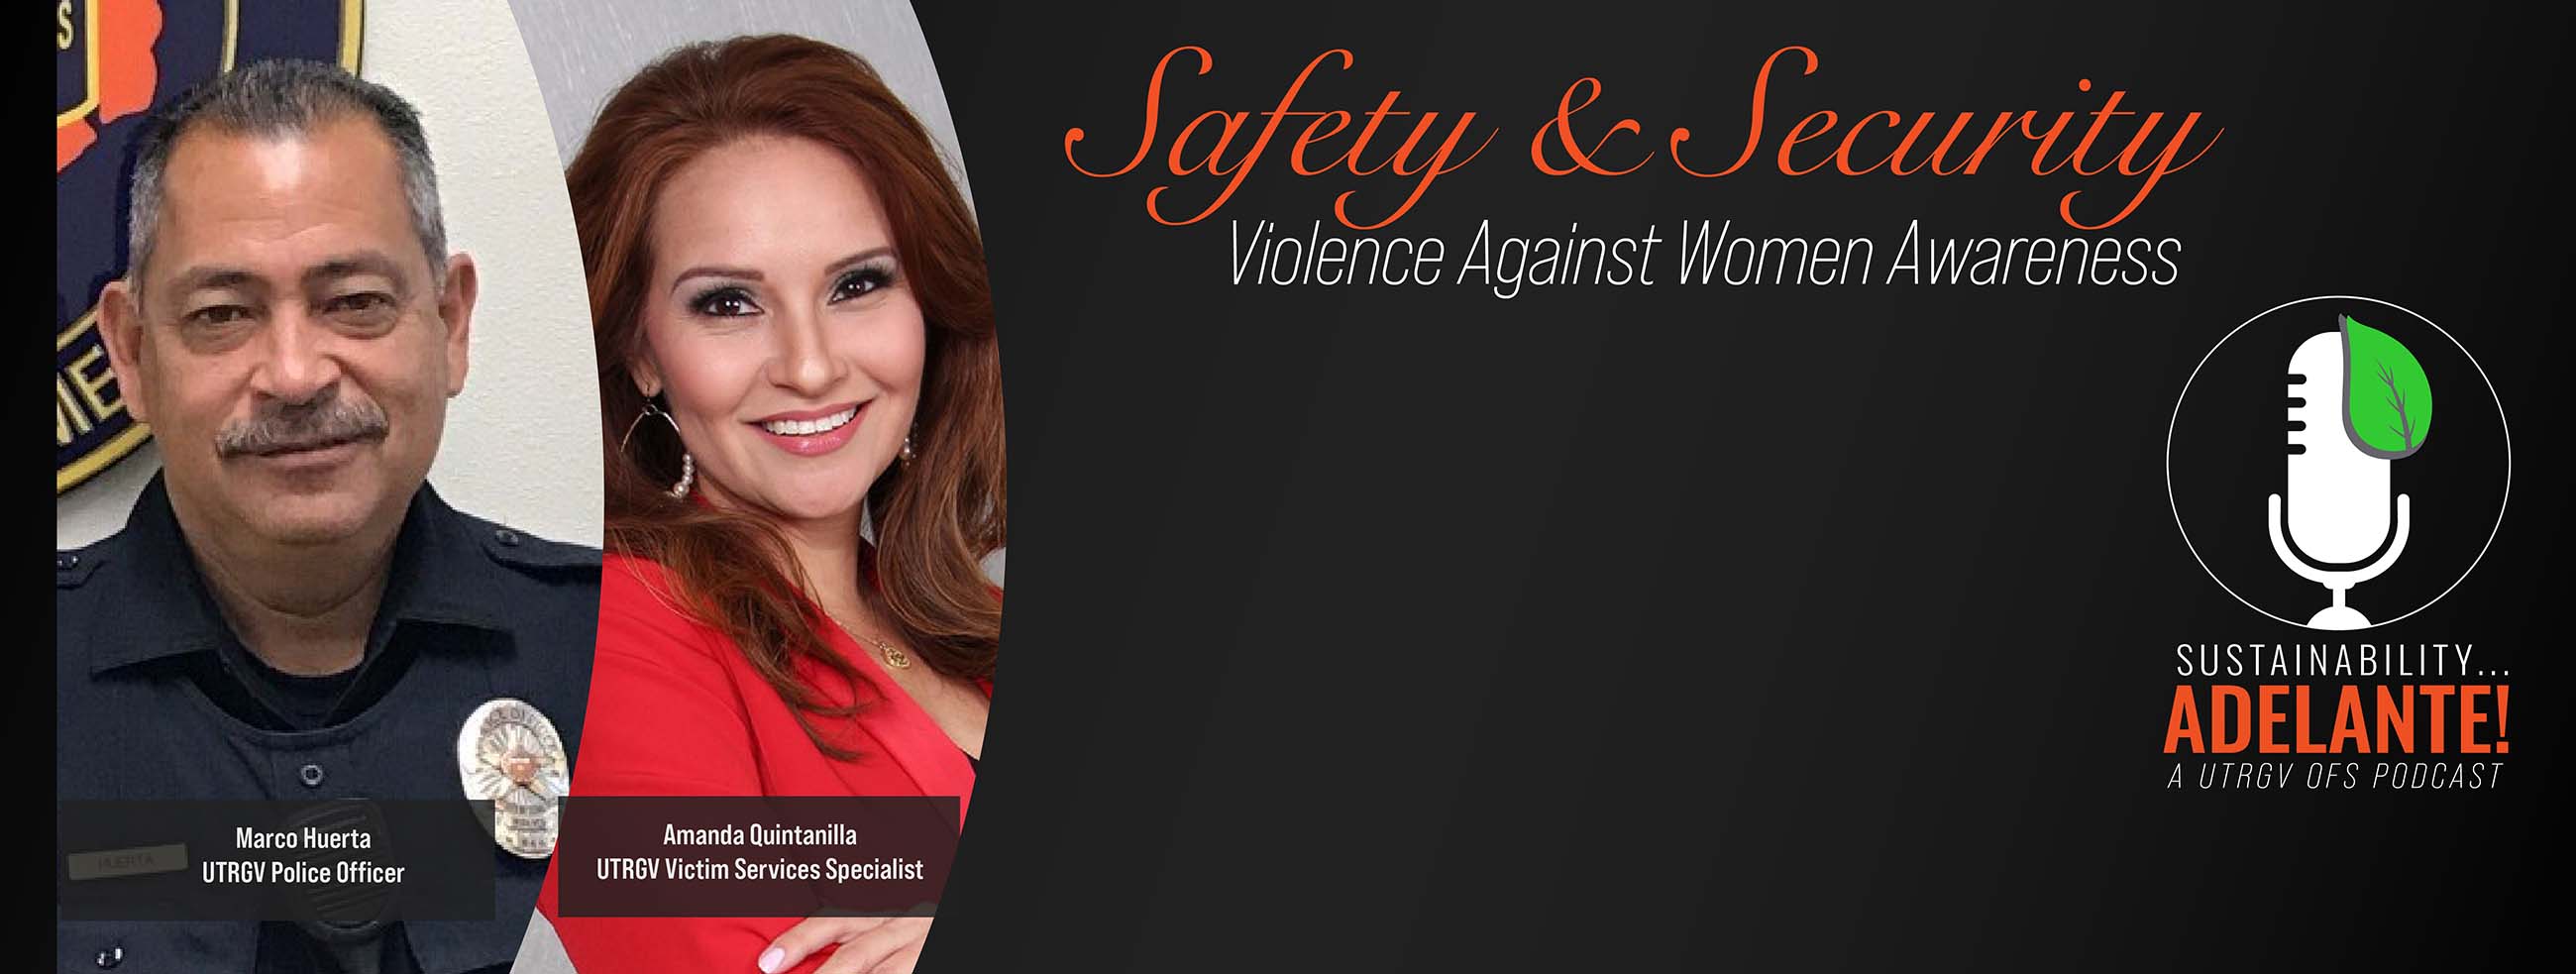 Safety and Security Violence Against Women Awareness featuring Marco Huerta, a UTRGV Police Officer, and Amanda Quintanilla a UTRGV Victim Services Specialist. Sustainability Adelante! A UTRGV OFS Podcast